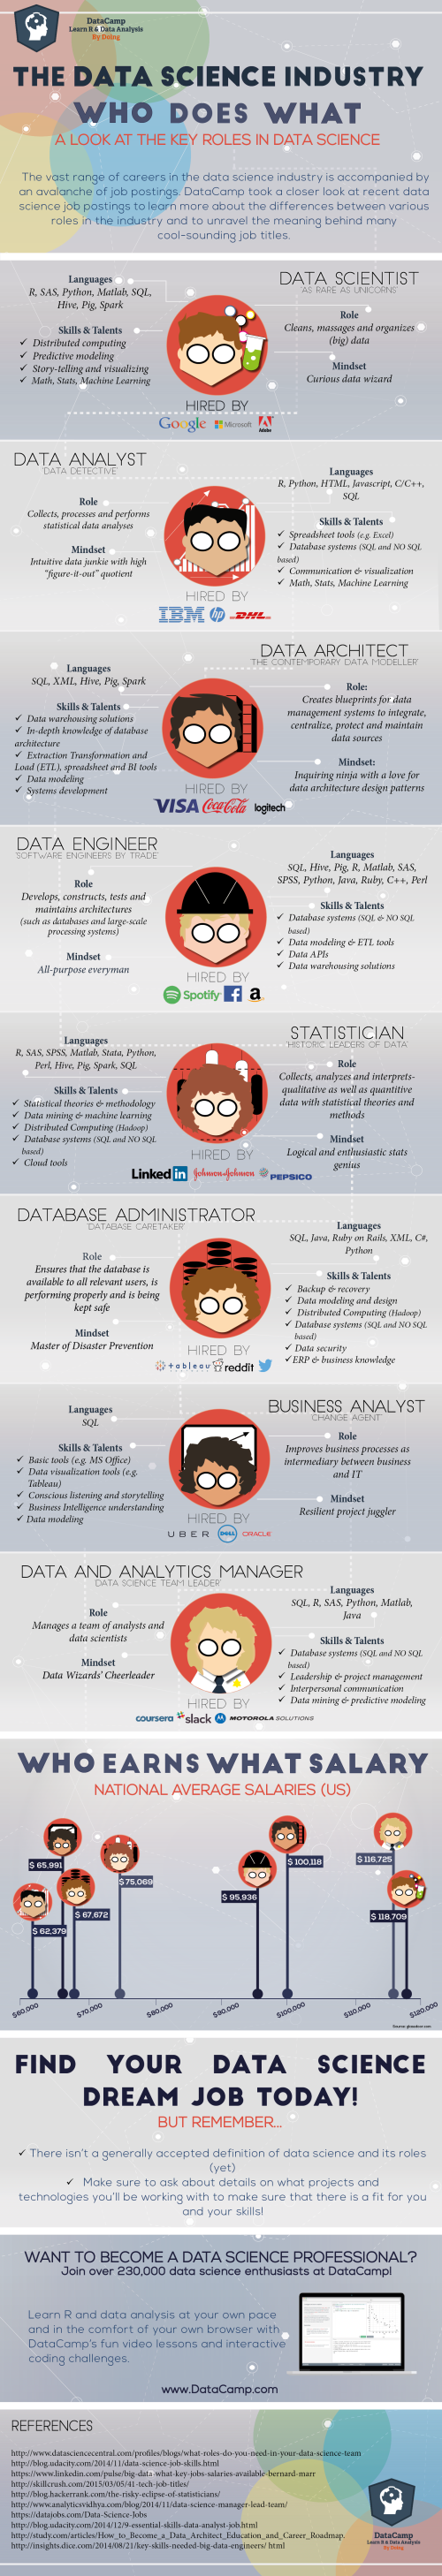 The Data Science Industry: Who Does What? infographic